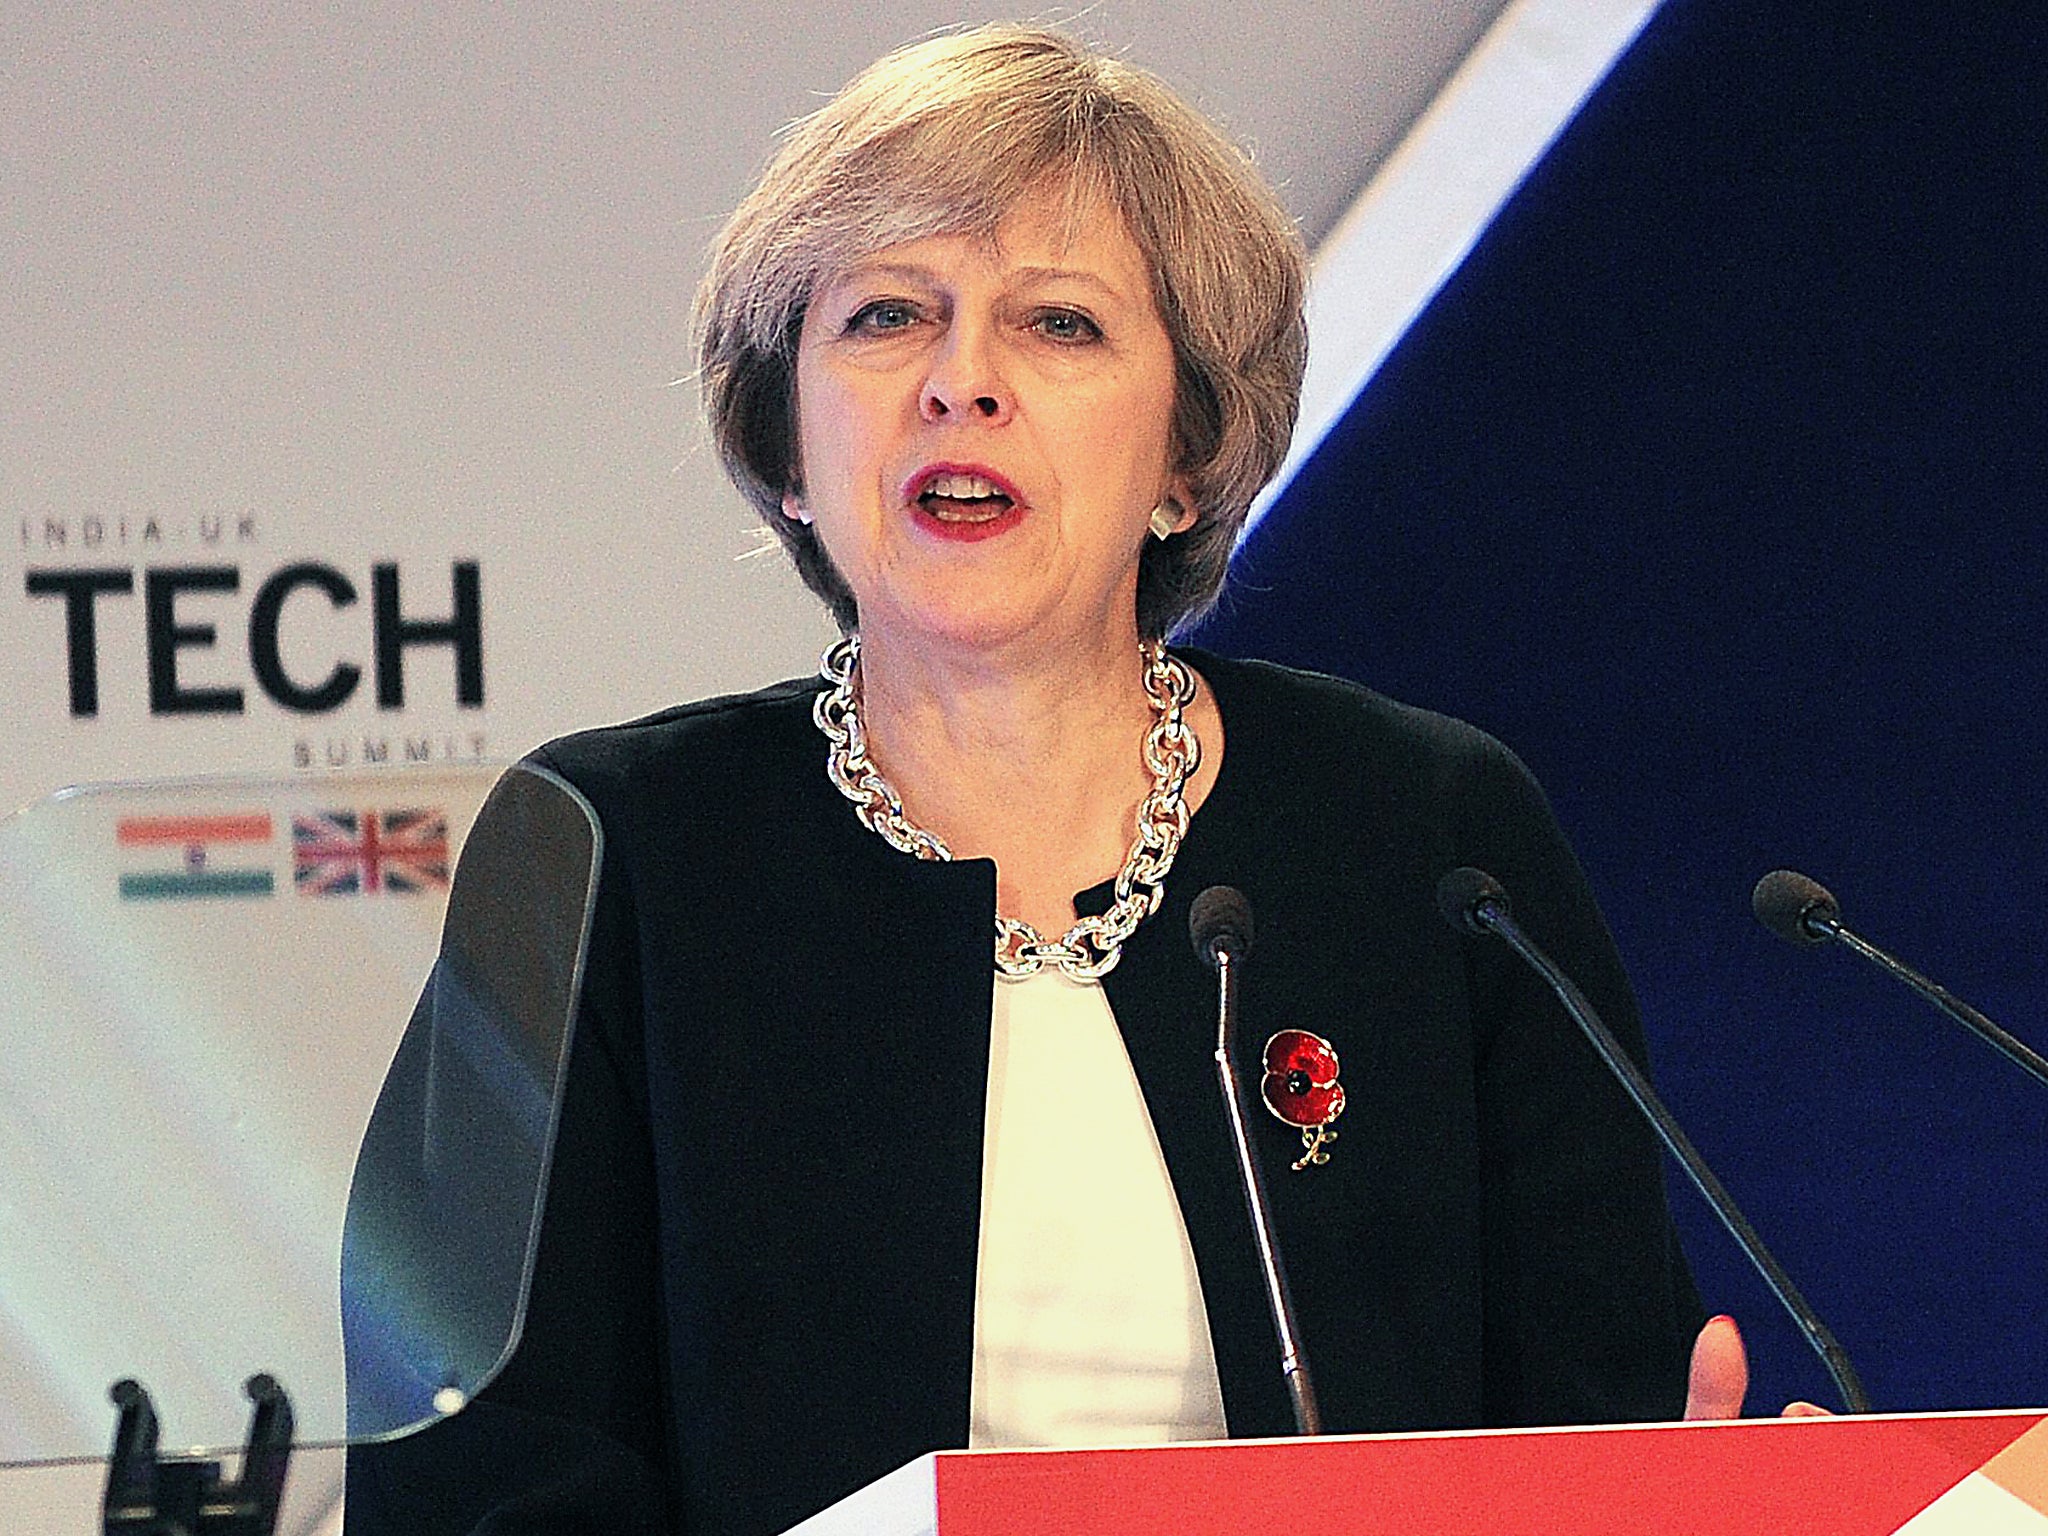 Ms May has spoken out - but not in too blatant terms, say experts